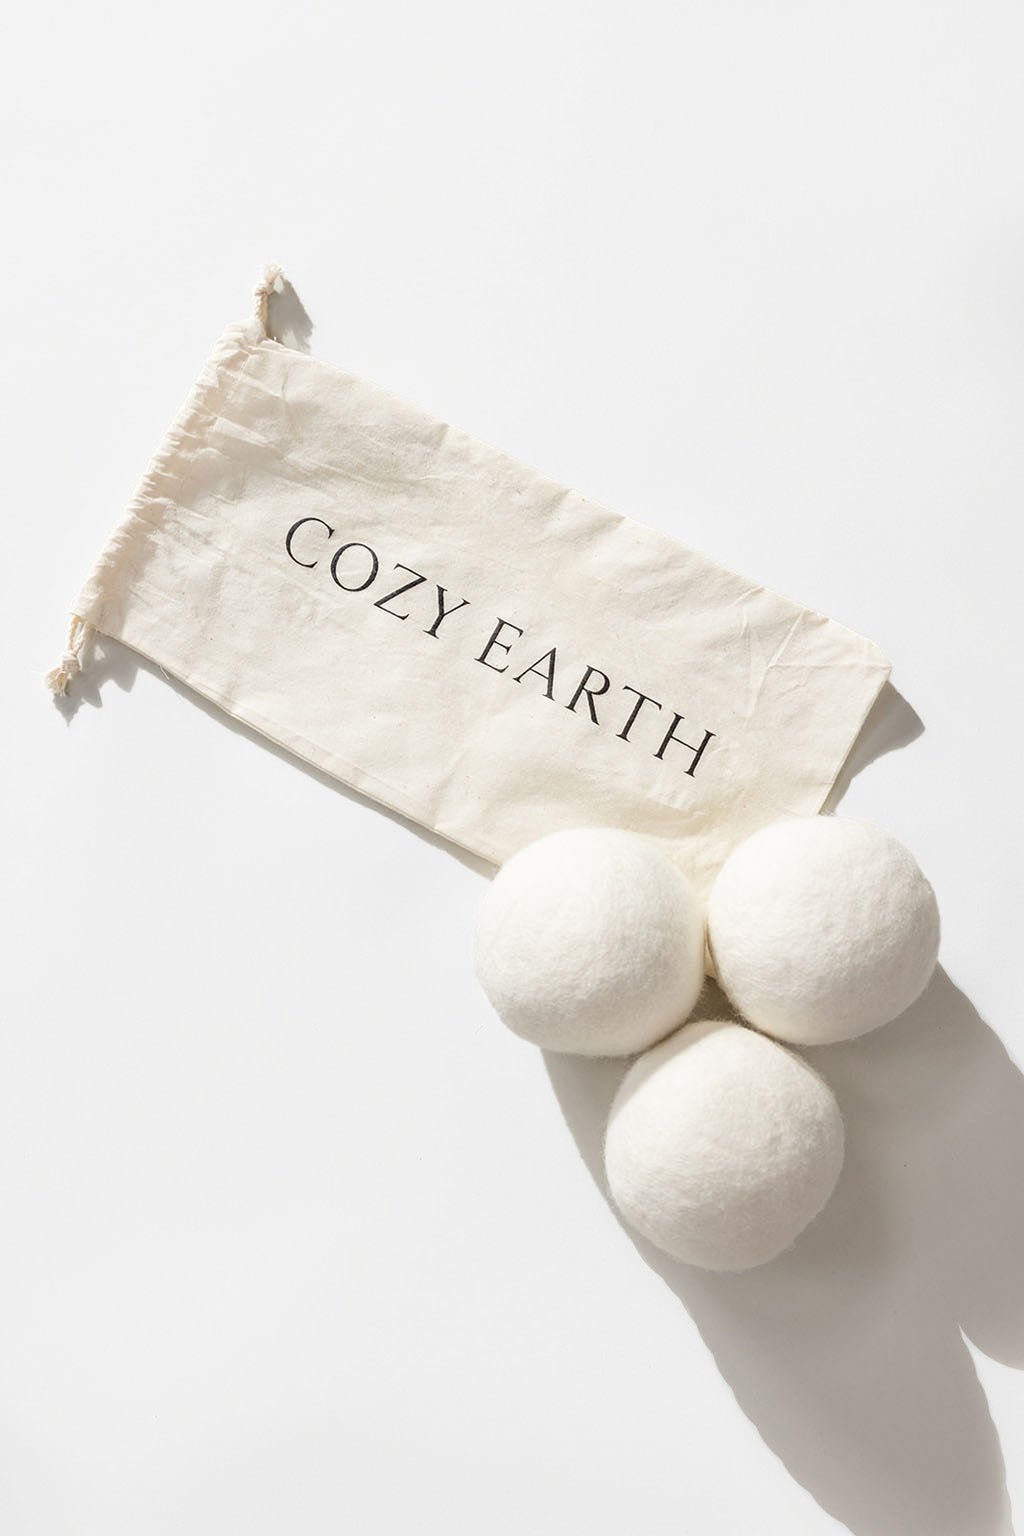 Wool Dryer Balls with storage bag resting on a white background.